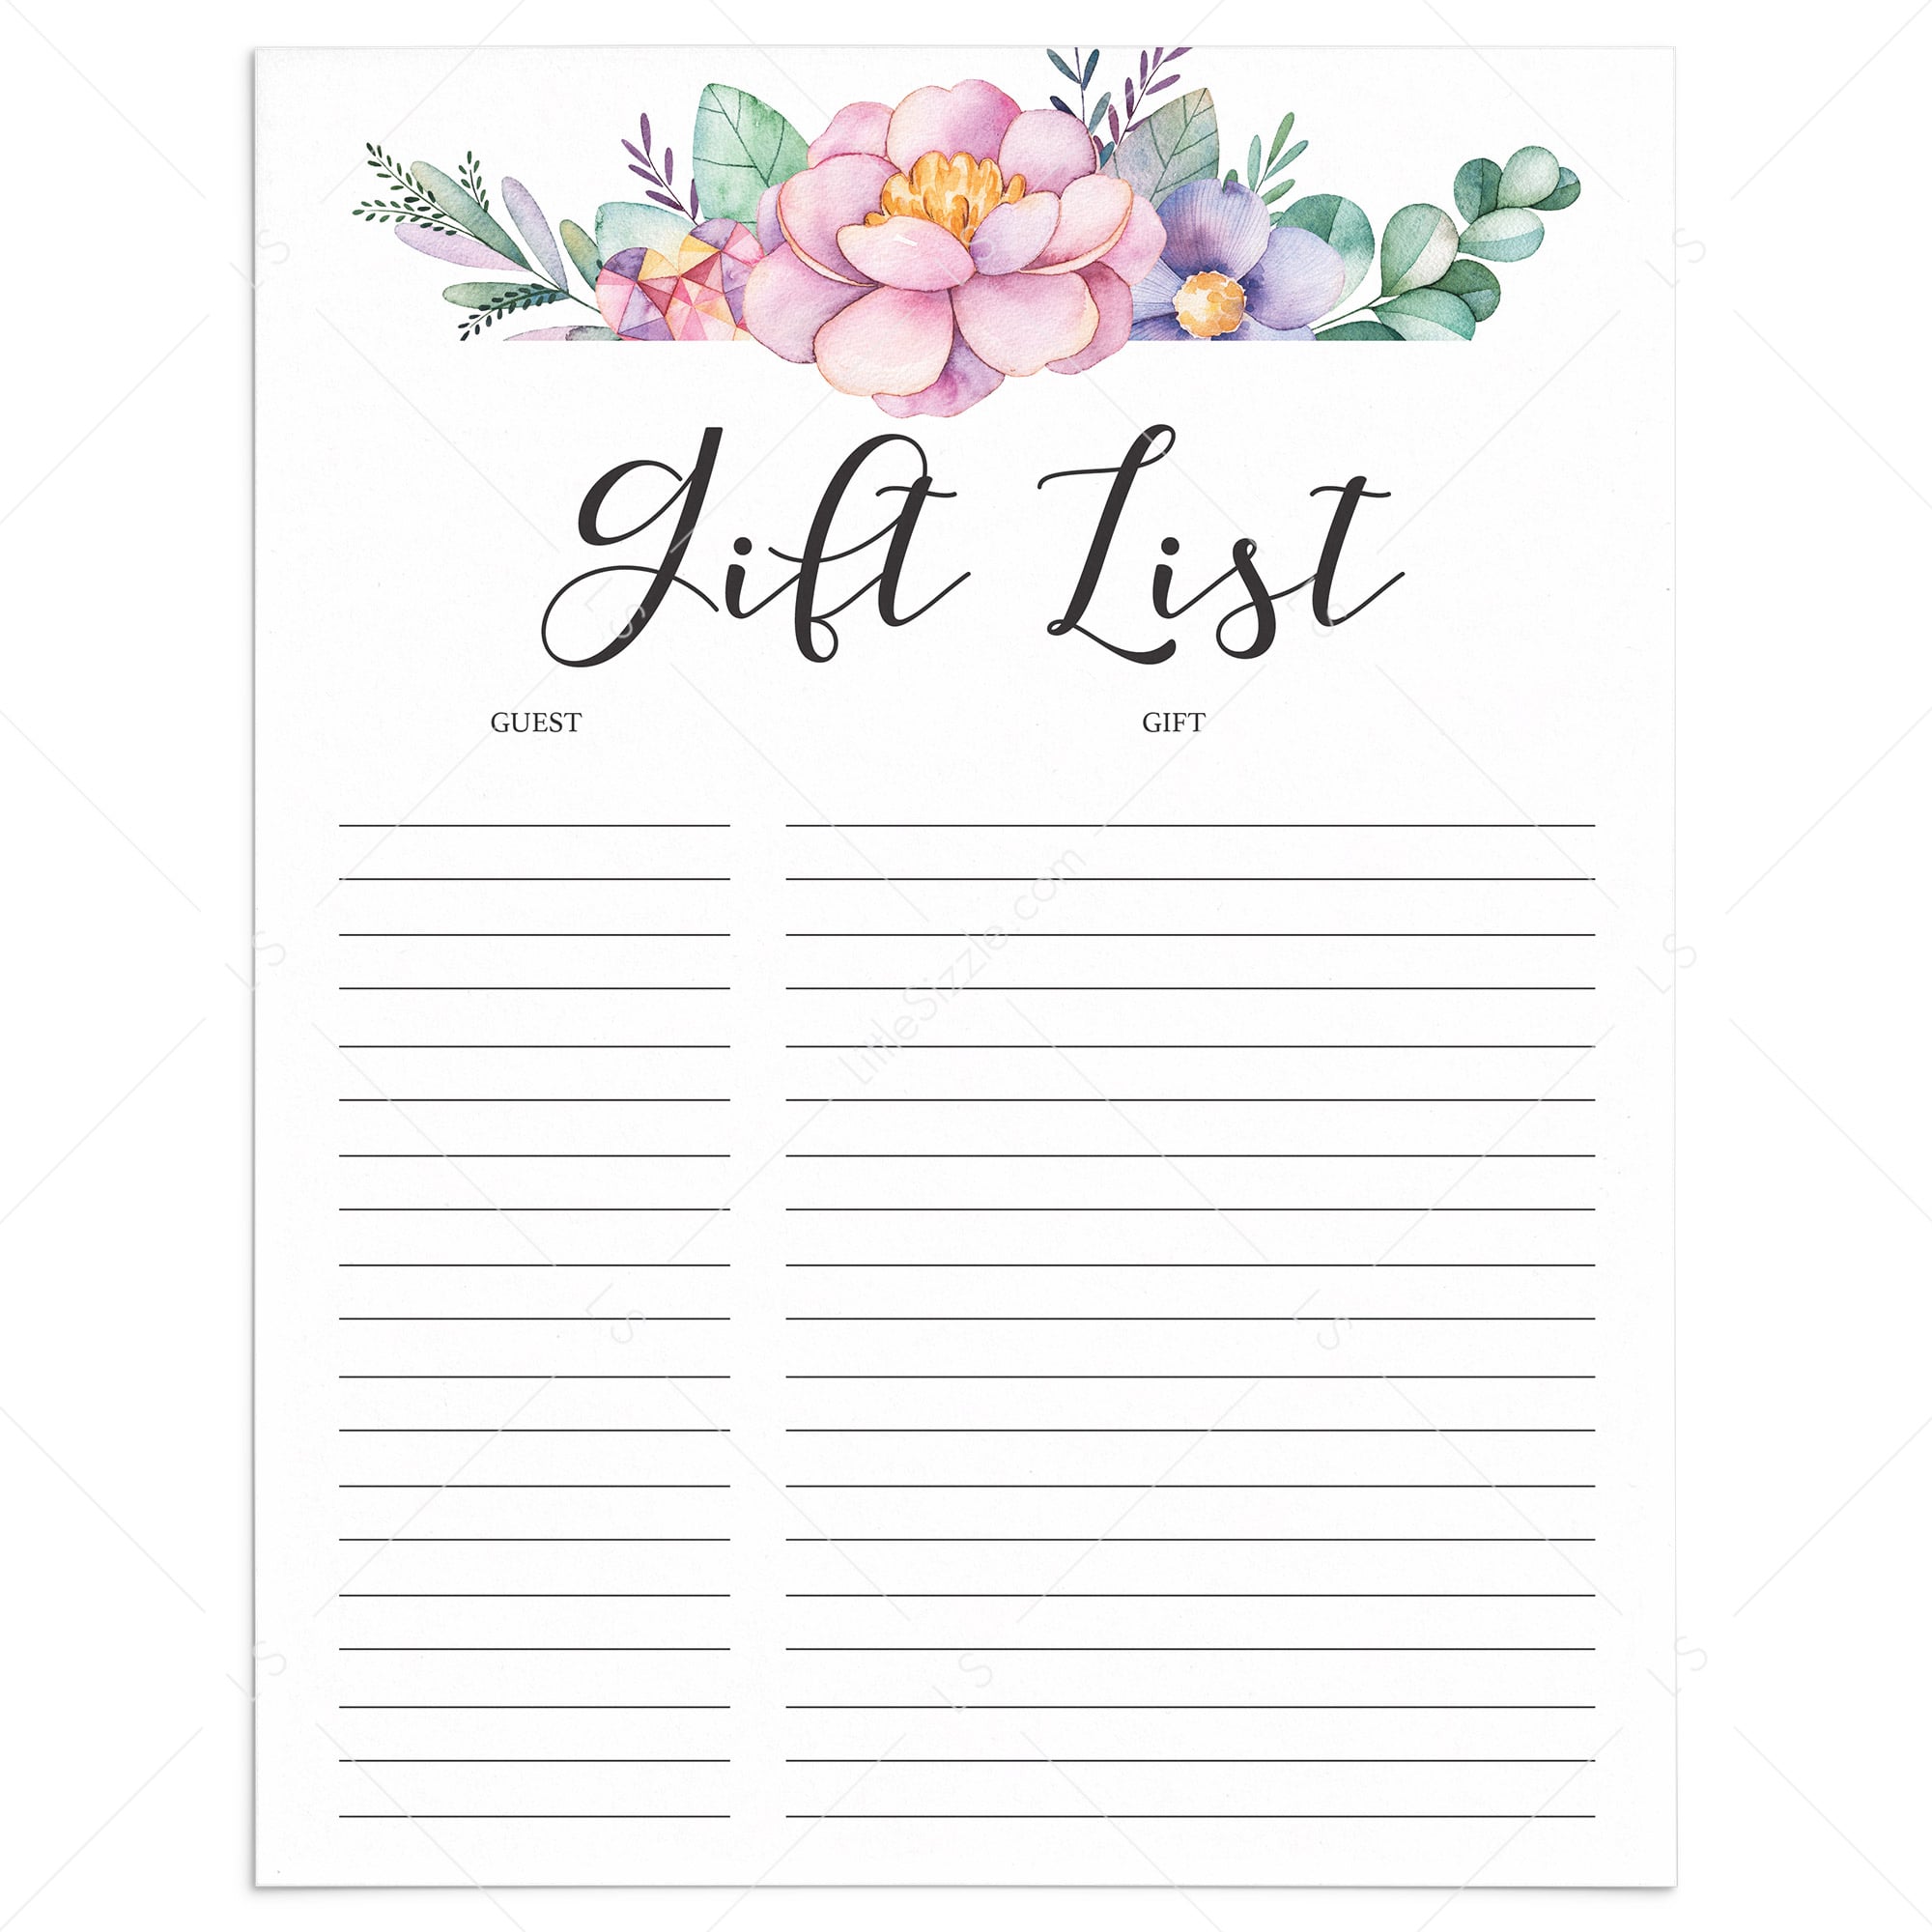 Printable guest and gift tracker for floral shower | Keep track of ...